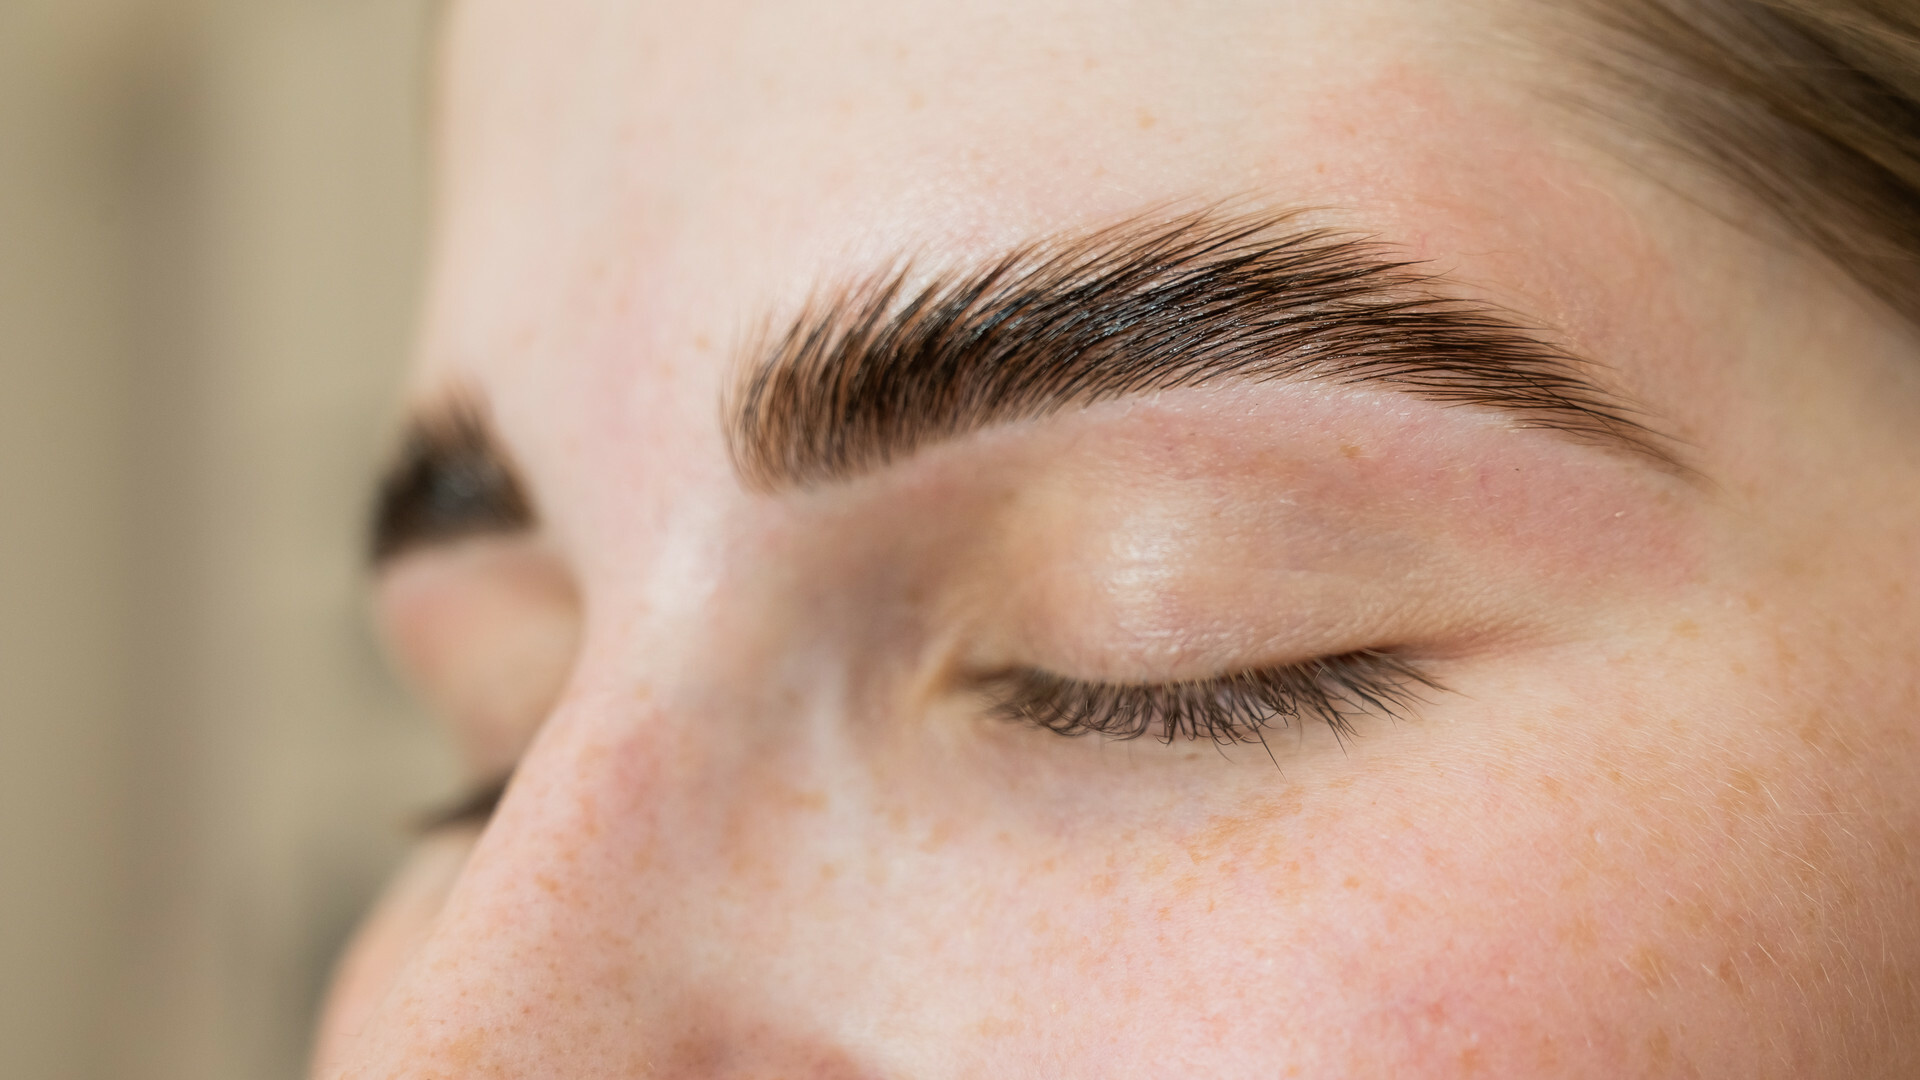 close-up of a person’s eyebrow area